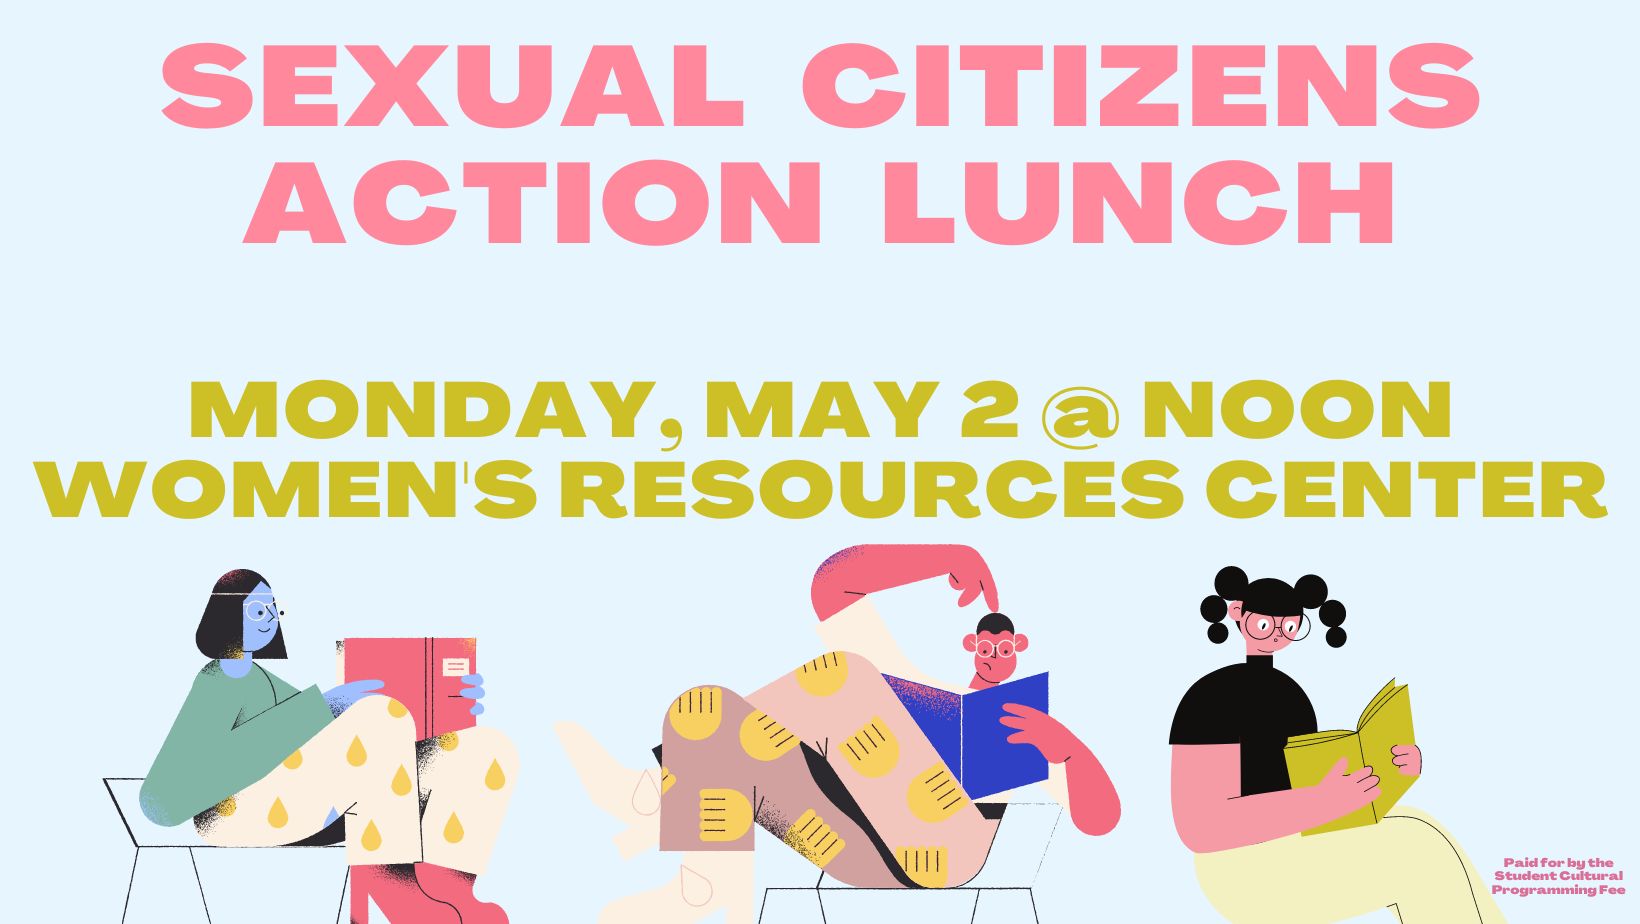 Sexual Citizens Action Lunch promo featuring three illustrations of figures sitting and reading books